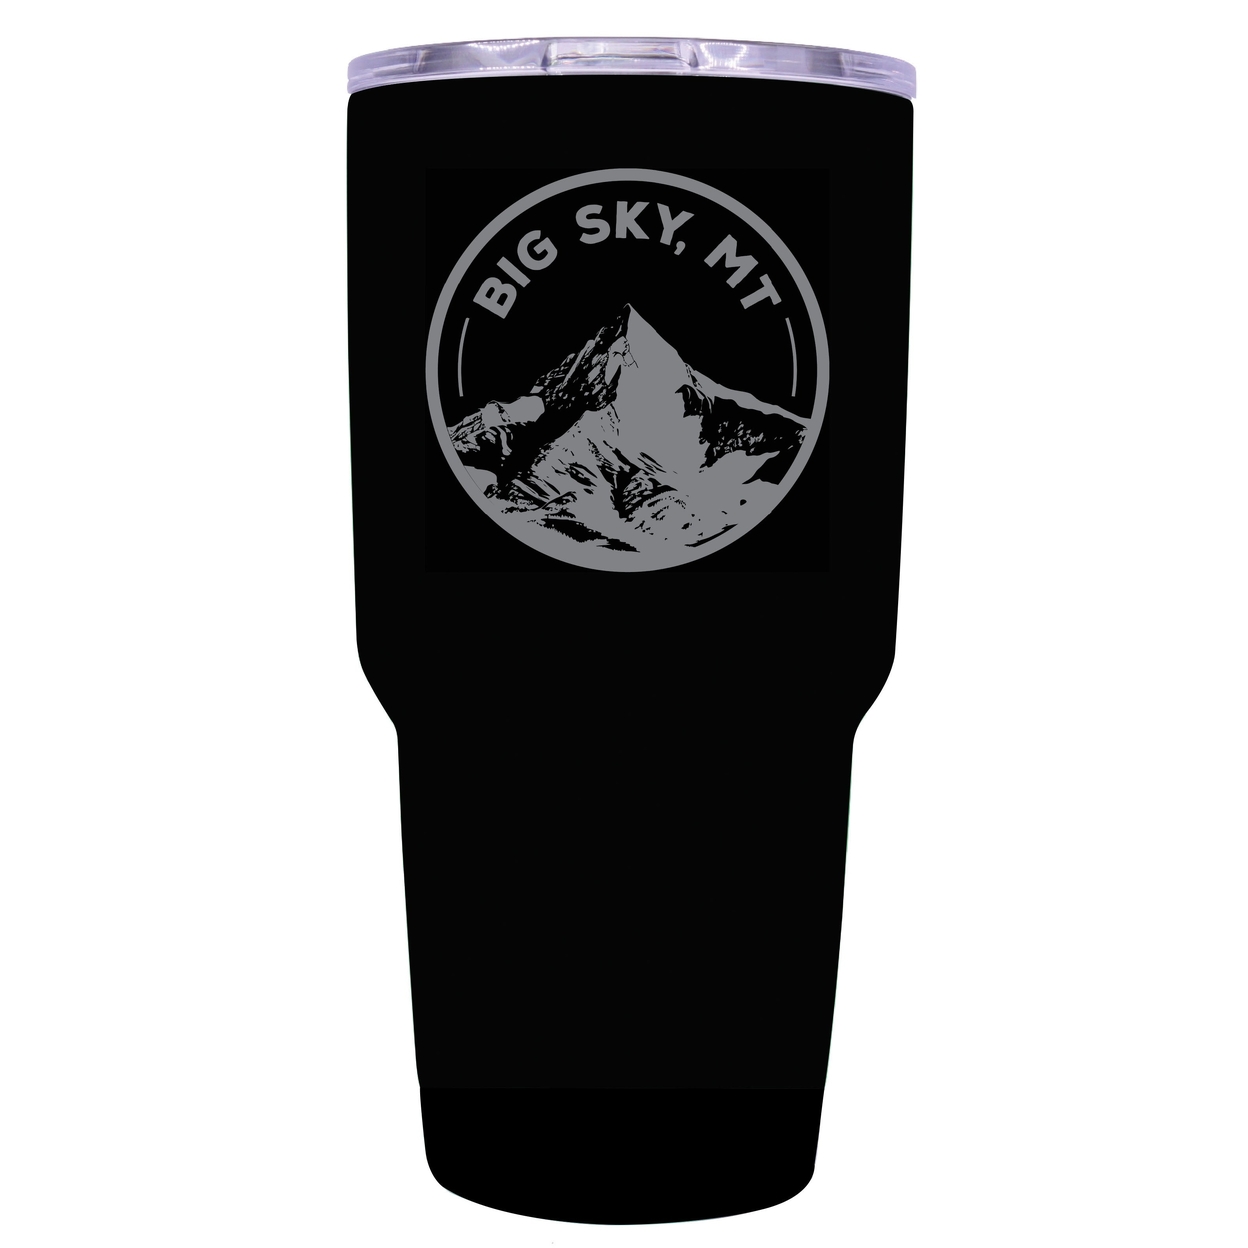 Big Sky Montana Souvenir 24 Oz Engraved Insulated Stainless Steel Tumbler - Black,,4-Pack